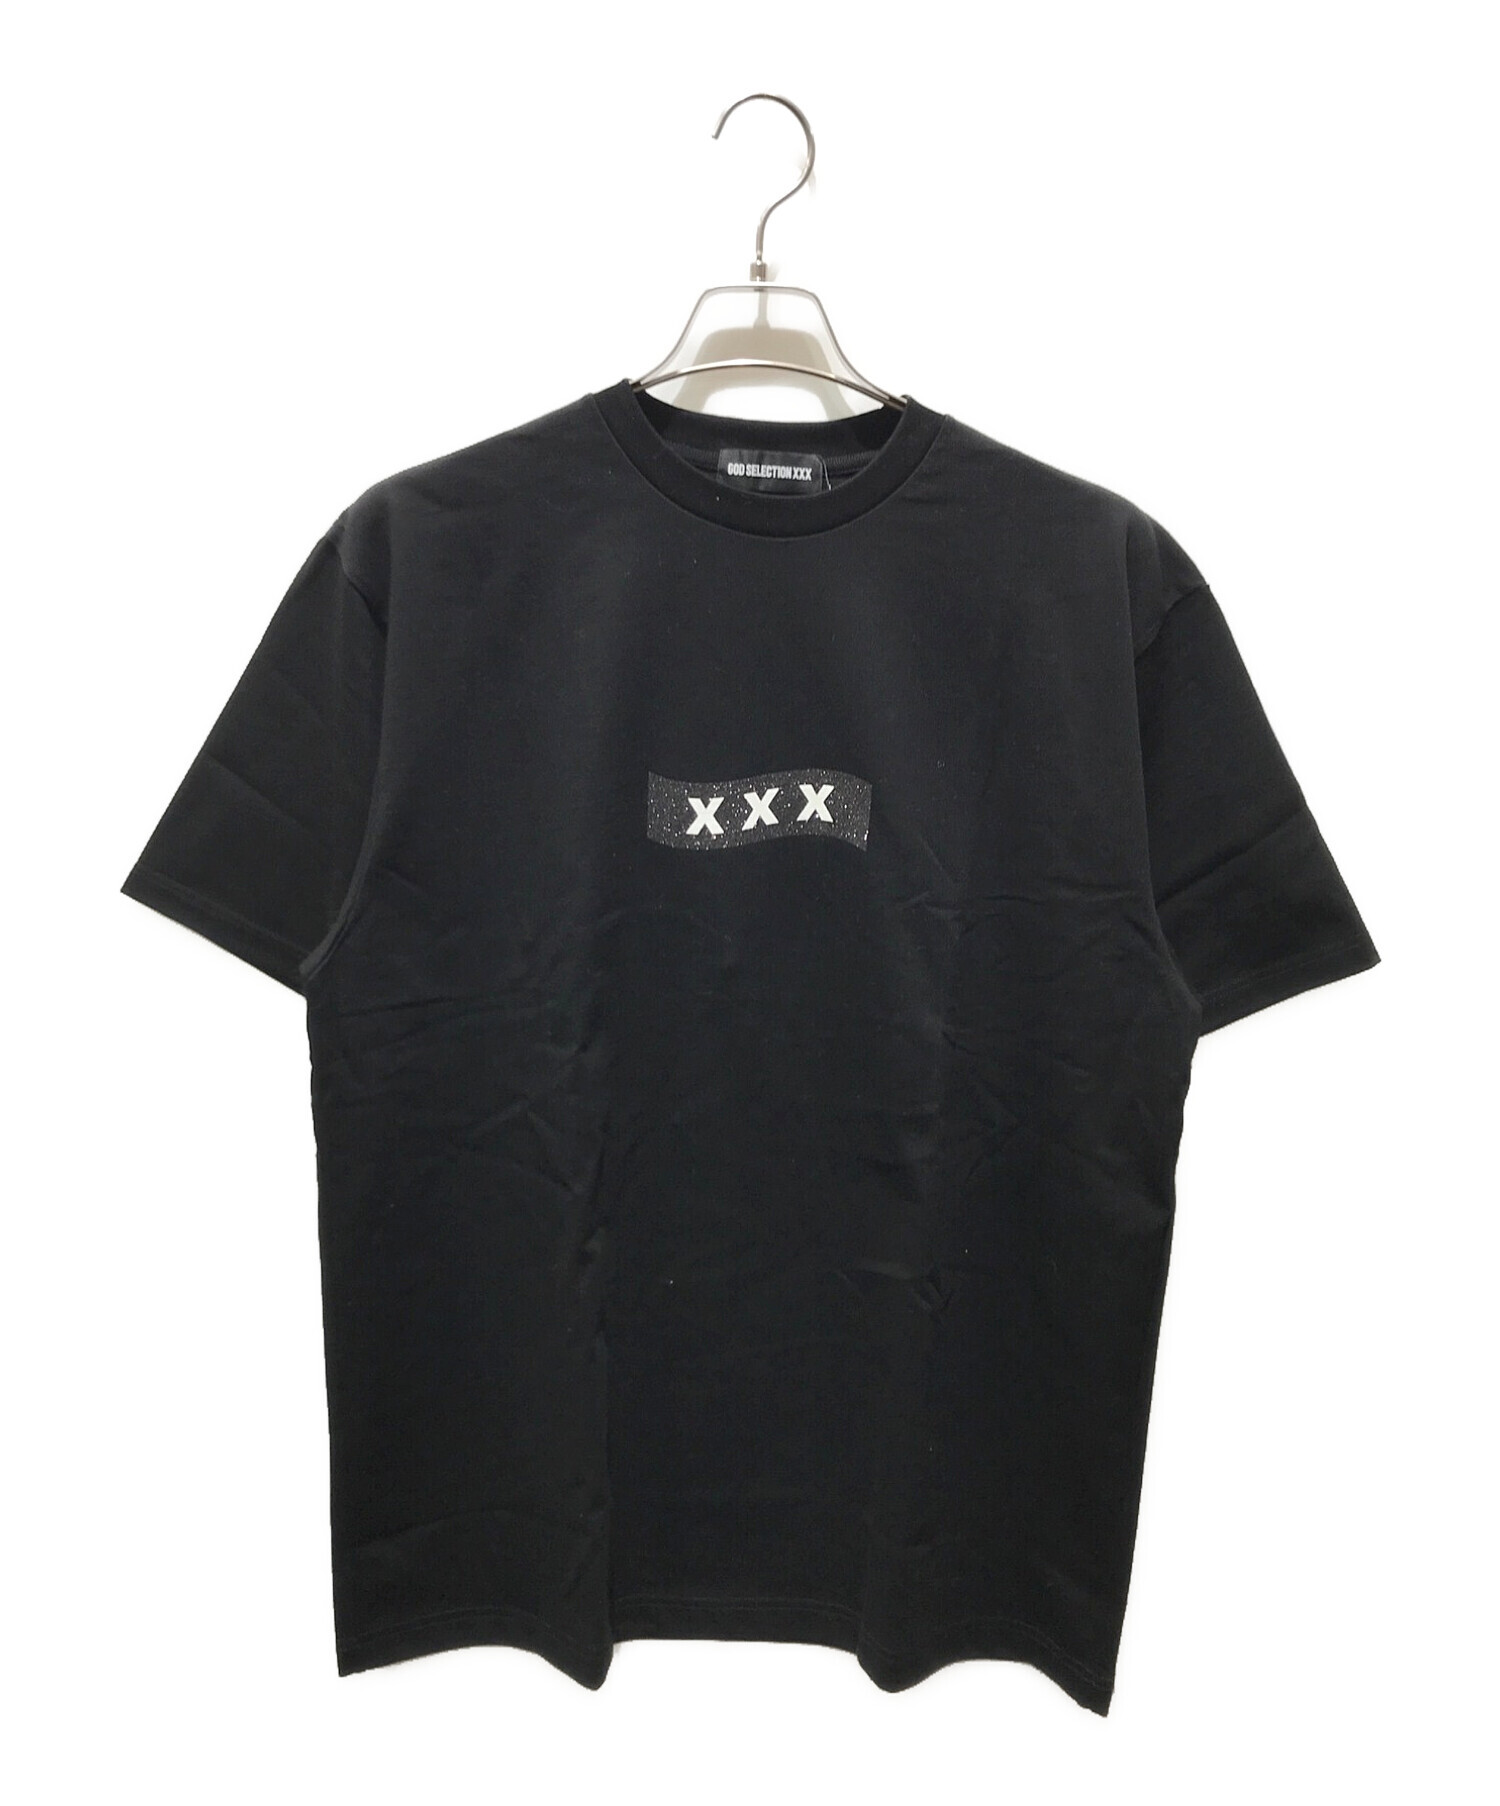 GOD SELECTION XXX x FRAGMENT Tシャツ フラグメント